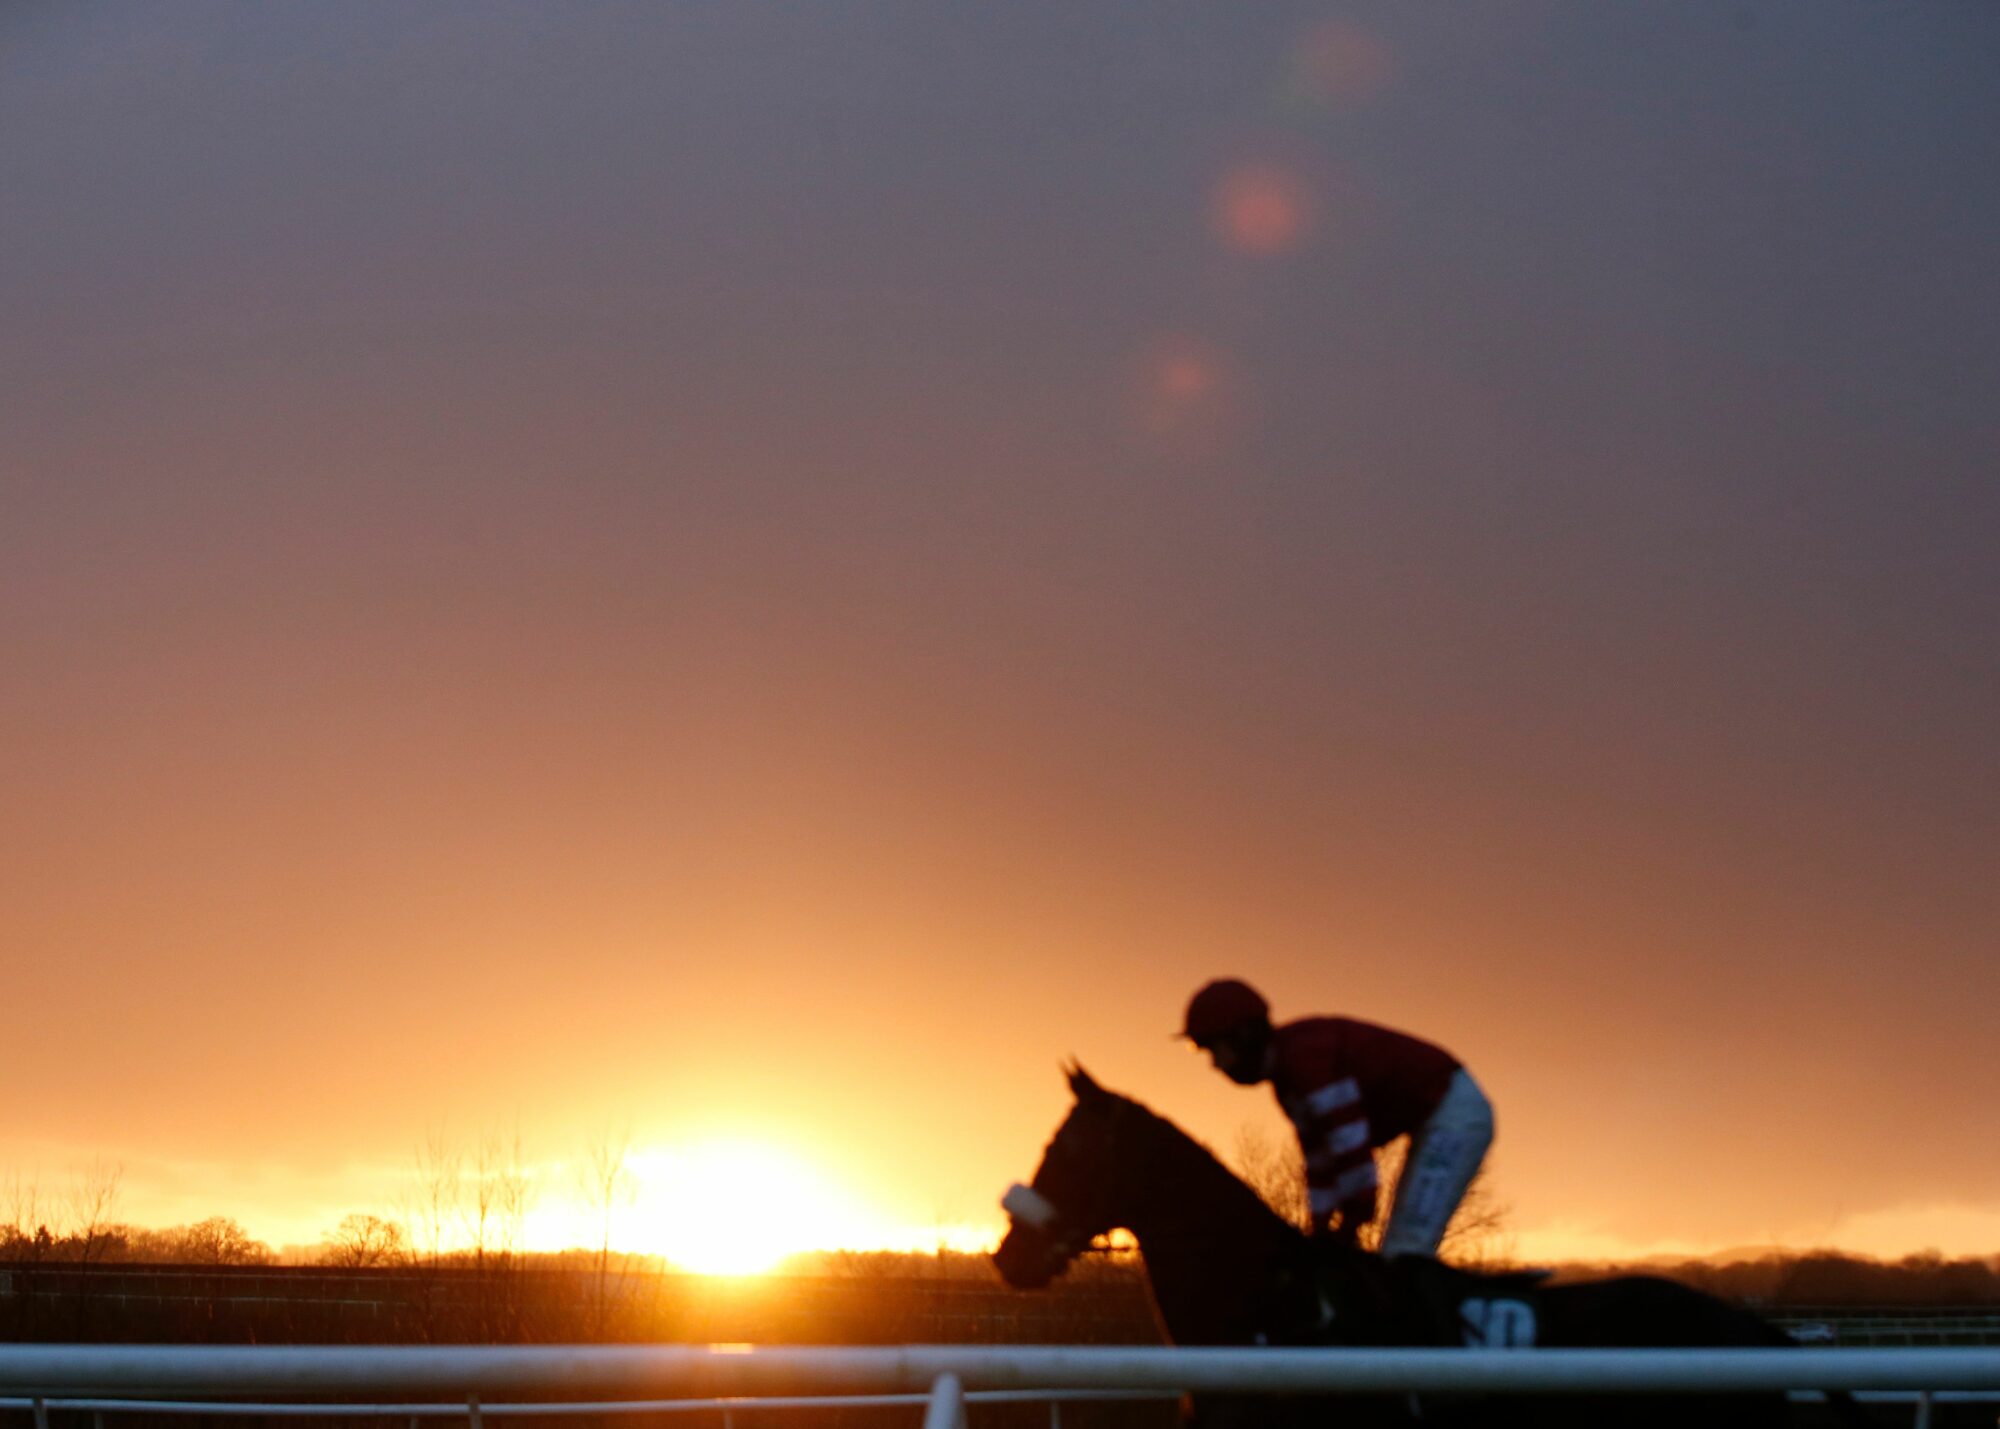 Image name blurry sunset racehorse jockey catterick racecourse yorkshire the 2 image from the post Catterick Jump Race at Catterick Racecourse on Thursday, December 28, 2023 in Yorkshire.com.